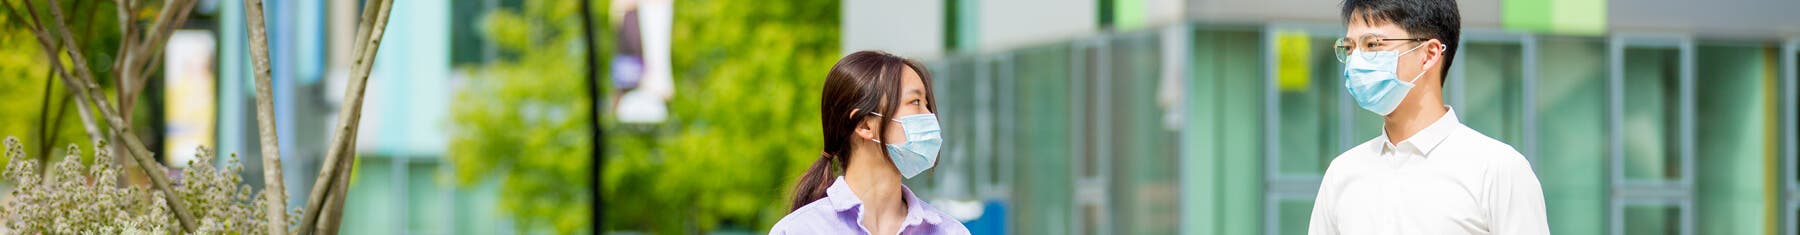 Students wearing face masks outside campus